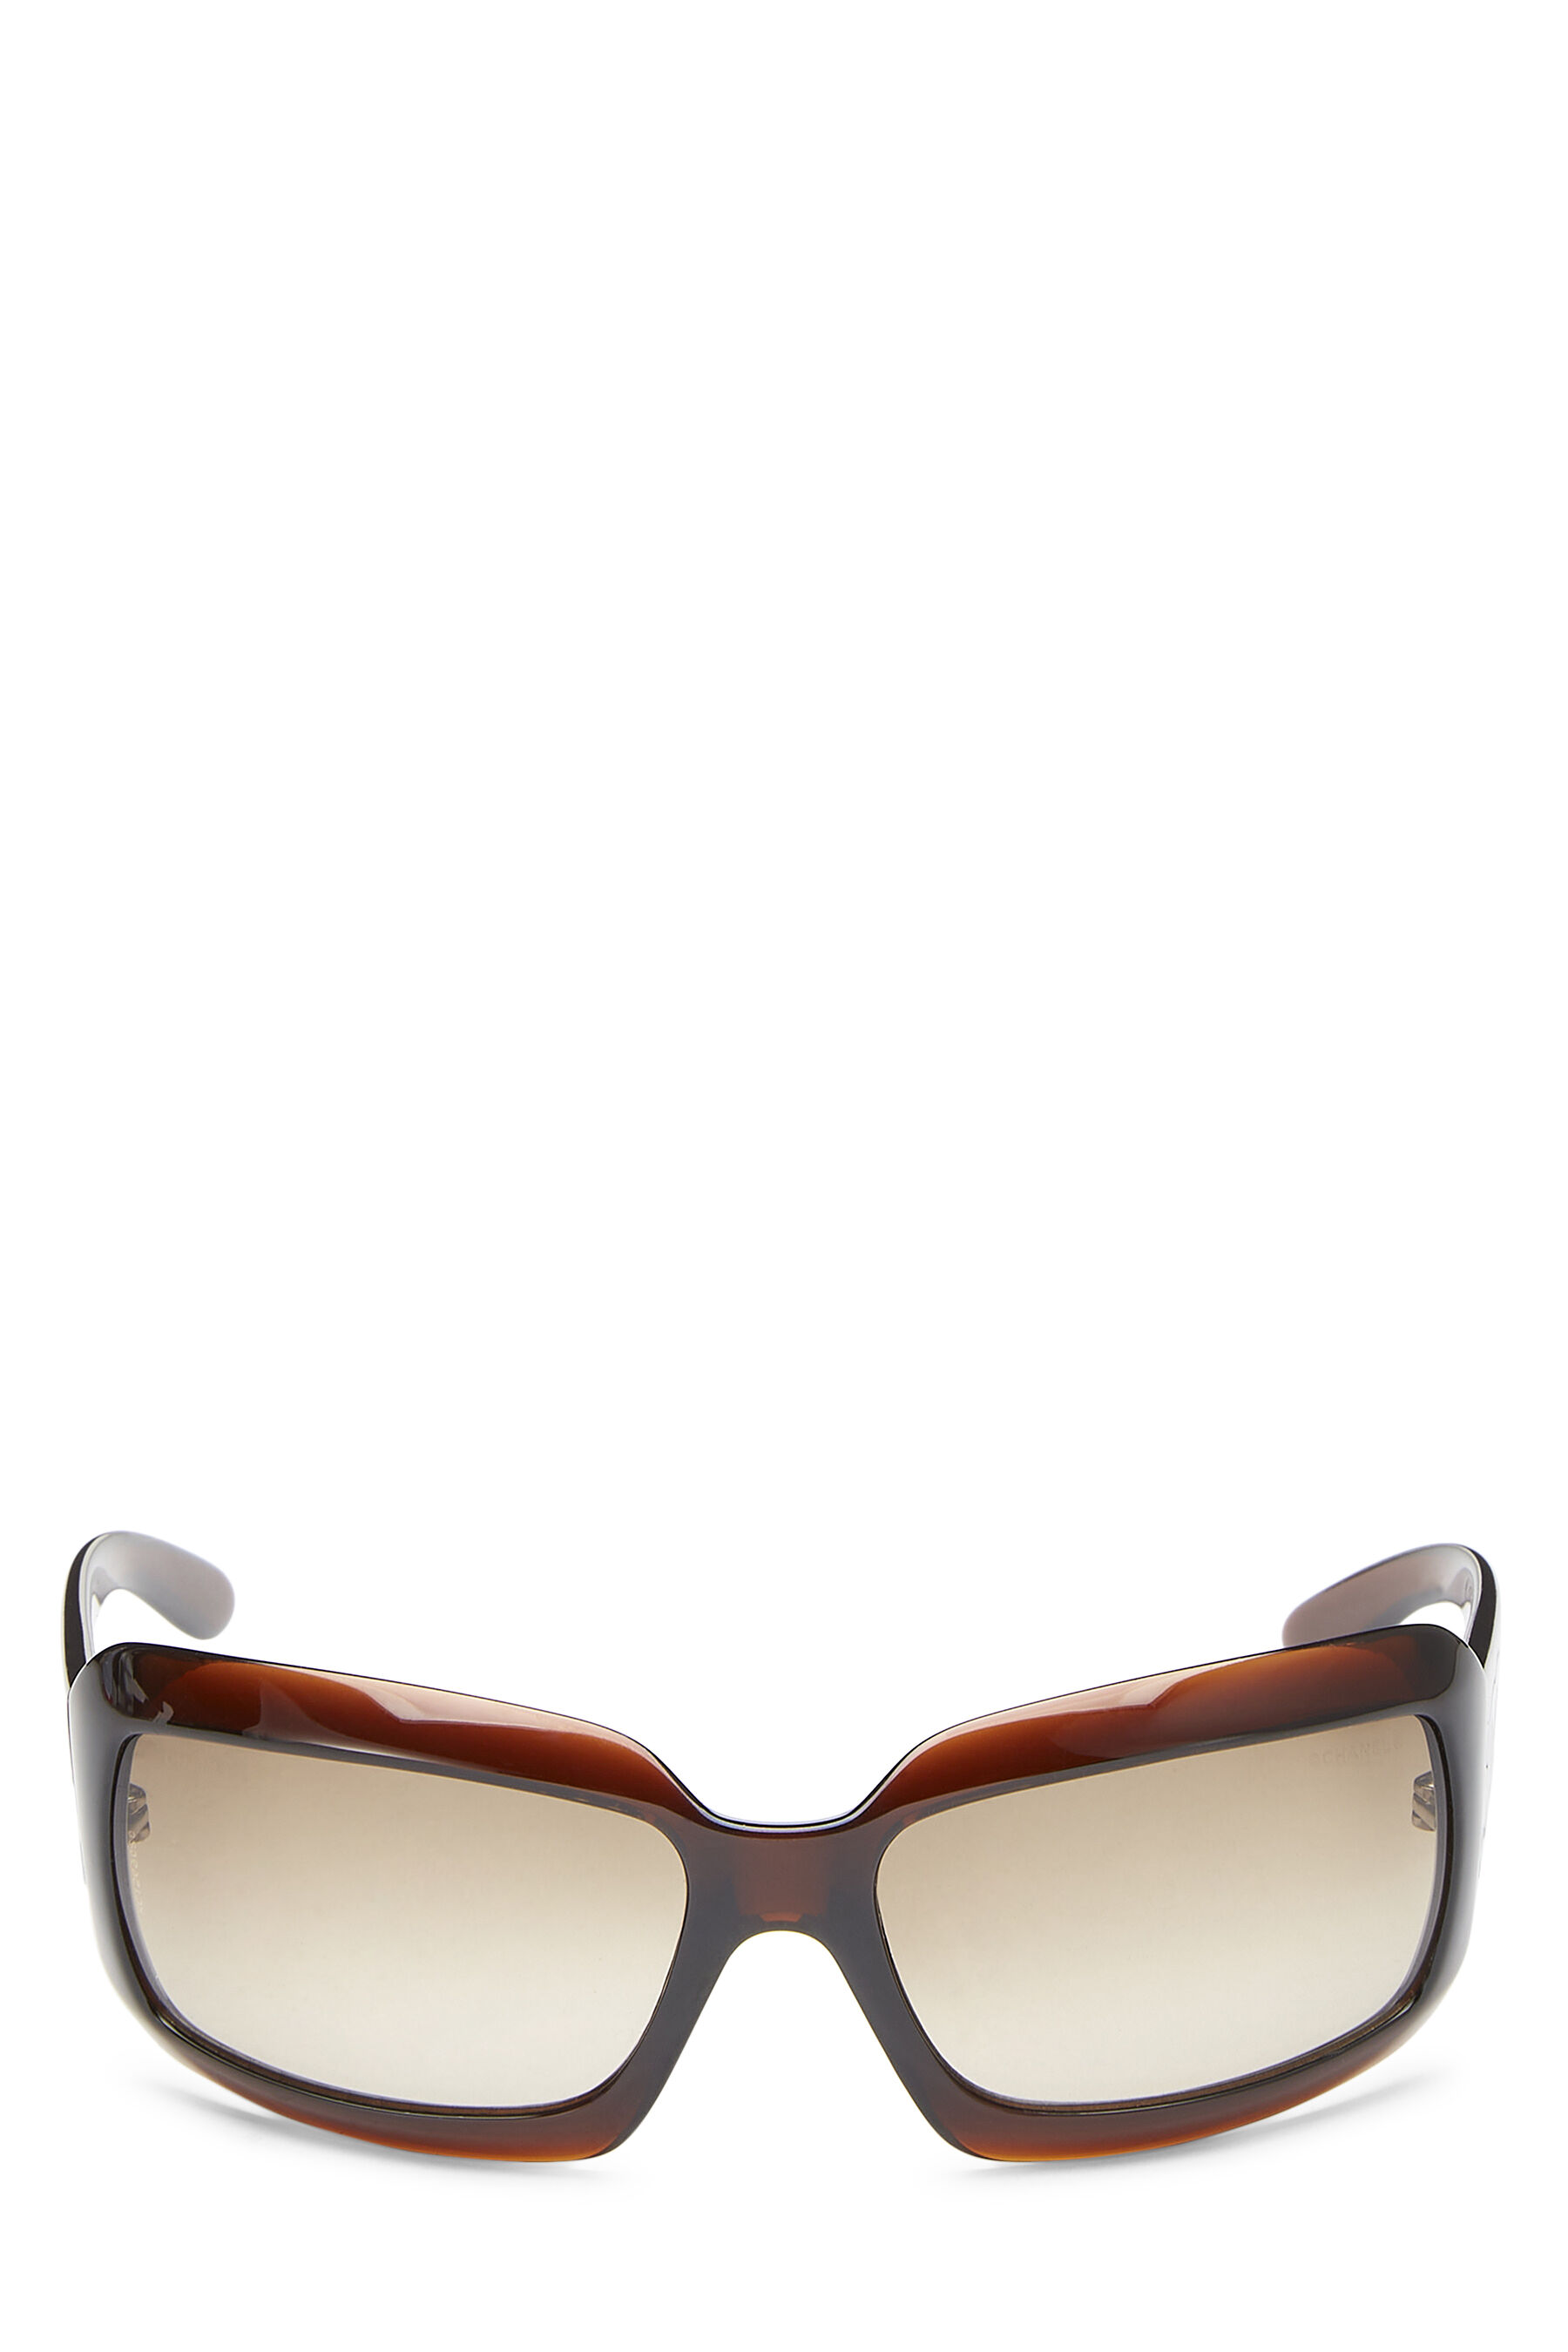 Oversized sunglasses Chanel Brown in Other - 22302460